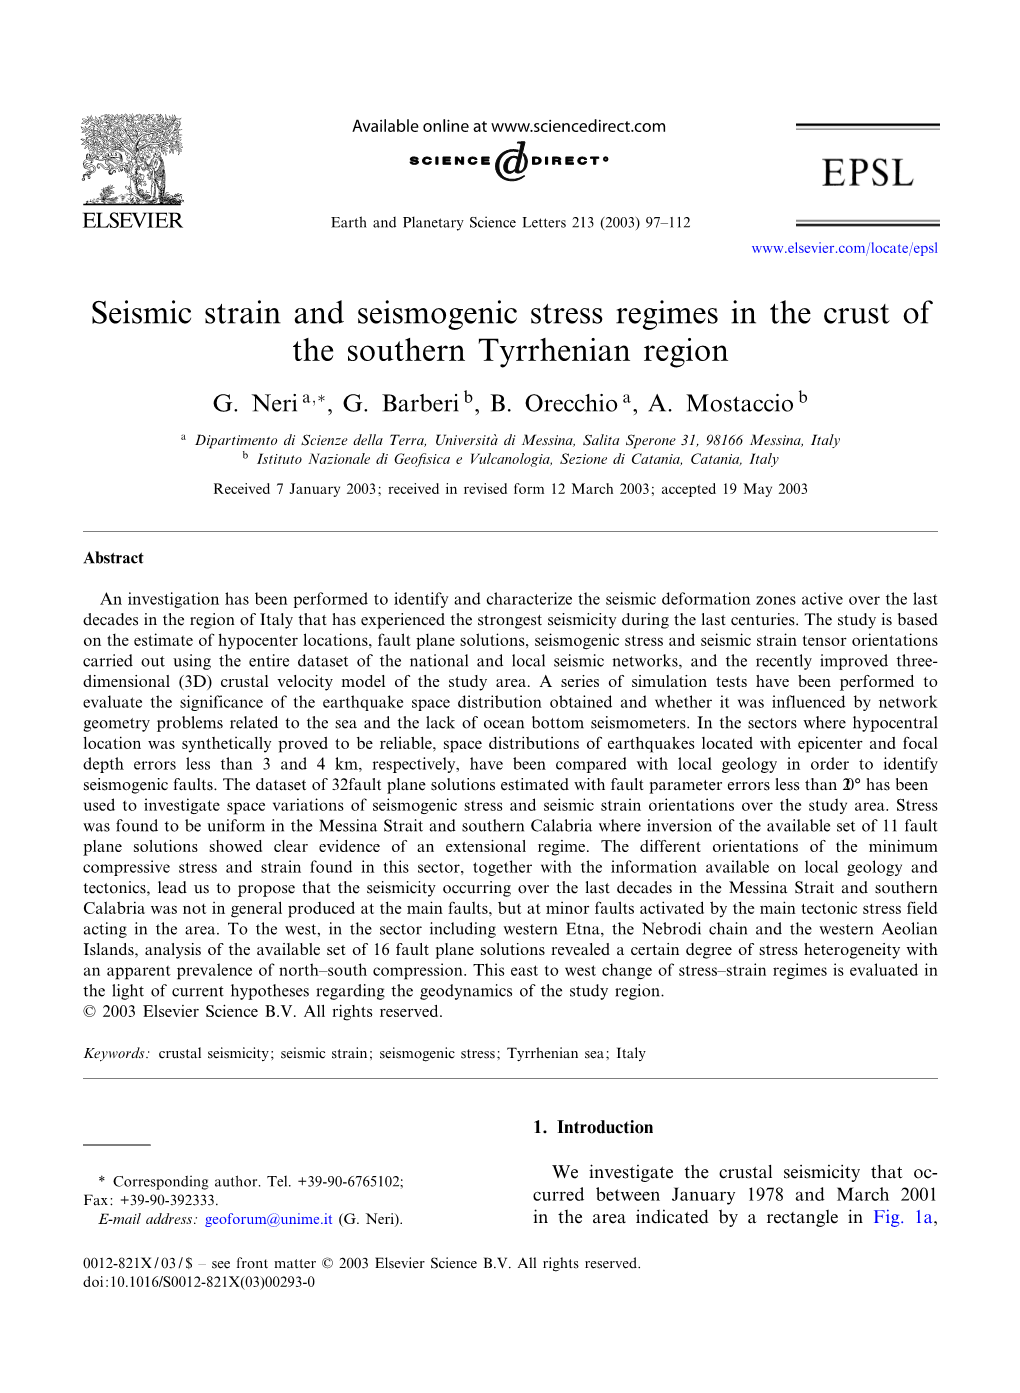 Seismic Strain and Seismogenic Stress Regimes in the Crust of the Southern Tyrrhenian Region